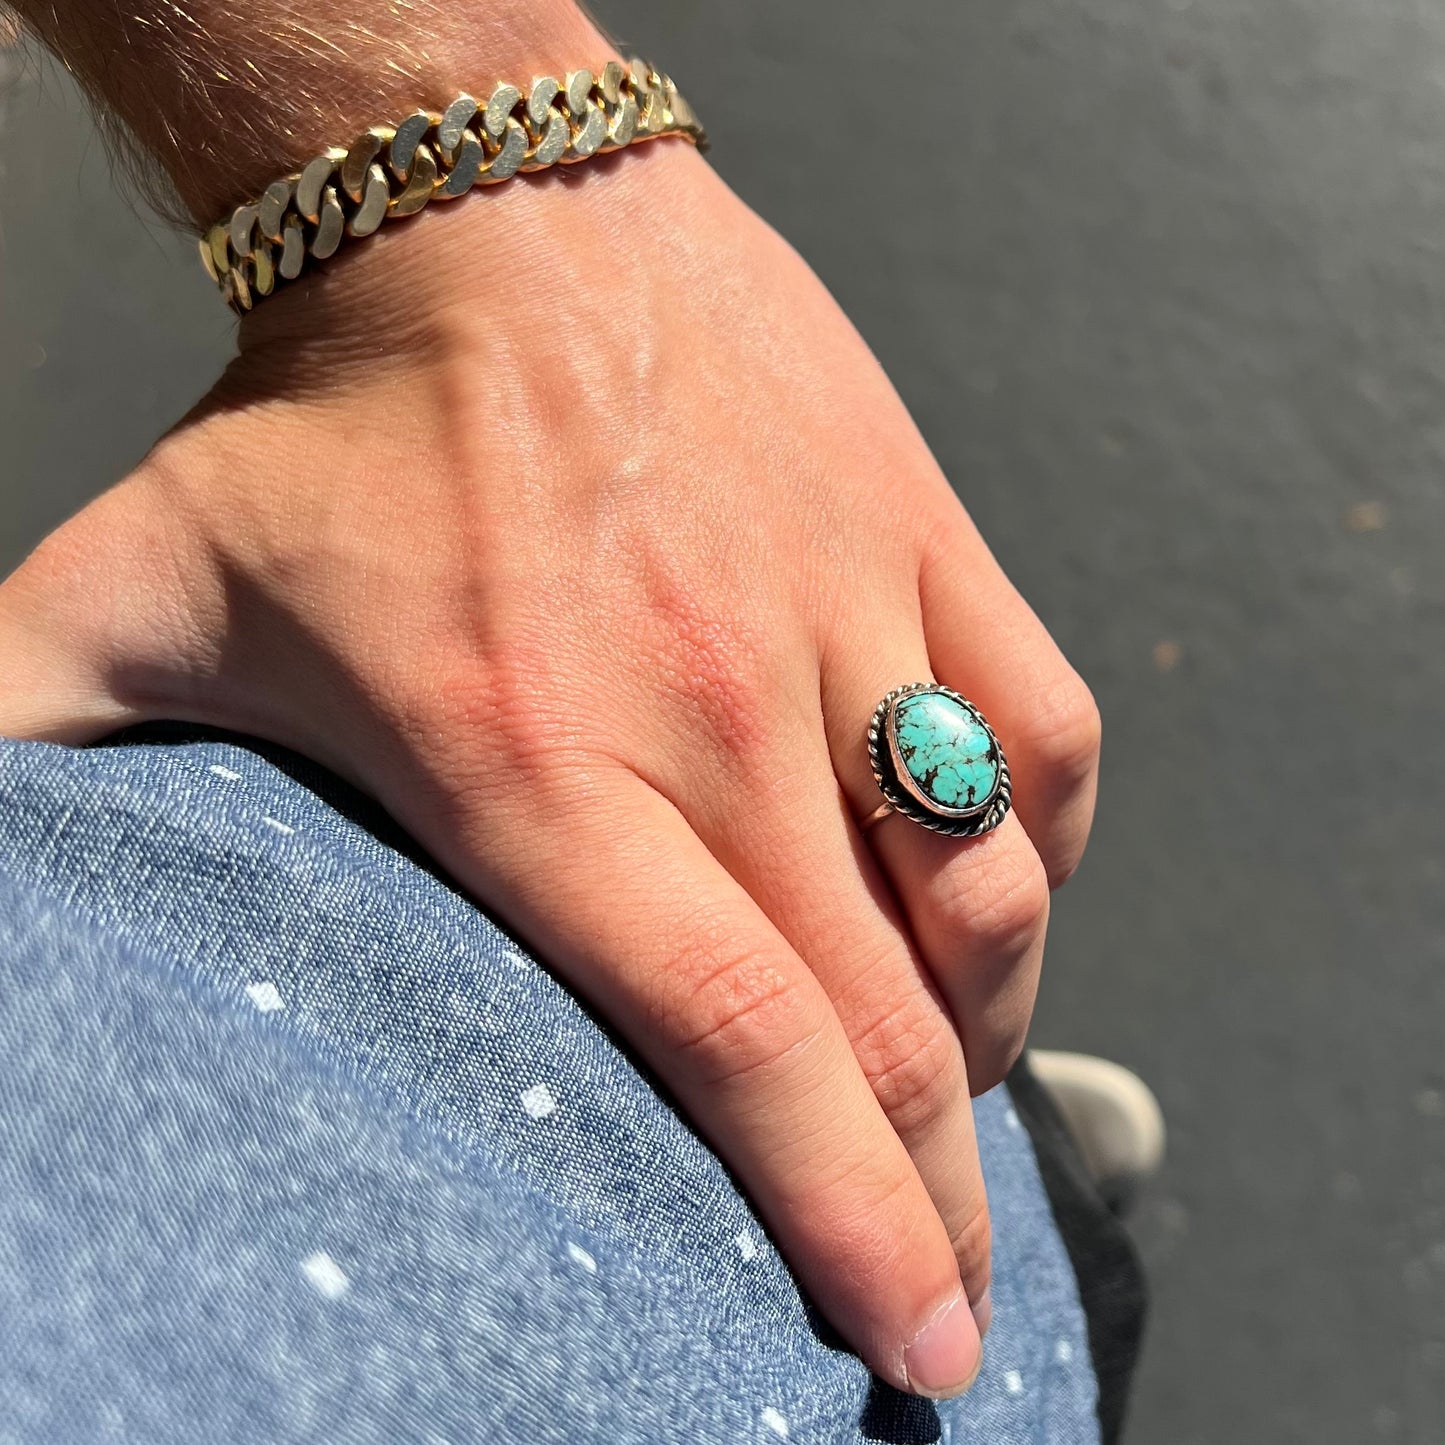 A handmade ladies' turquoise solitaire ring.  The ring has a rope bezel design.